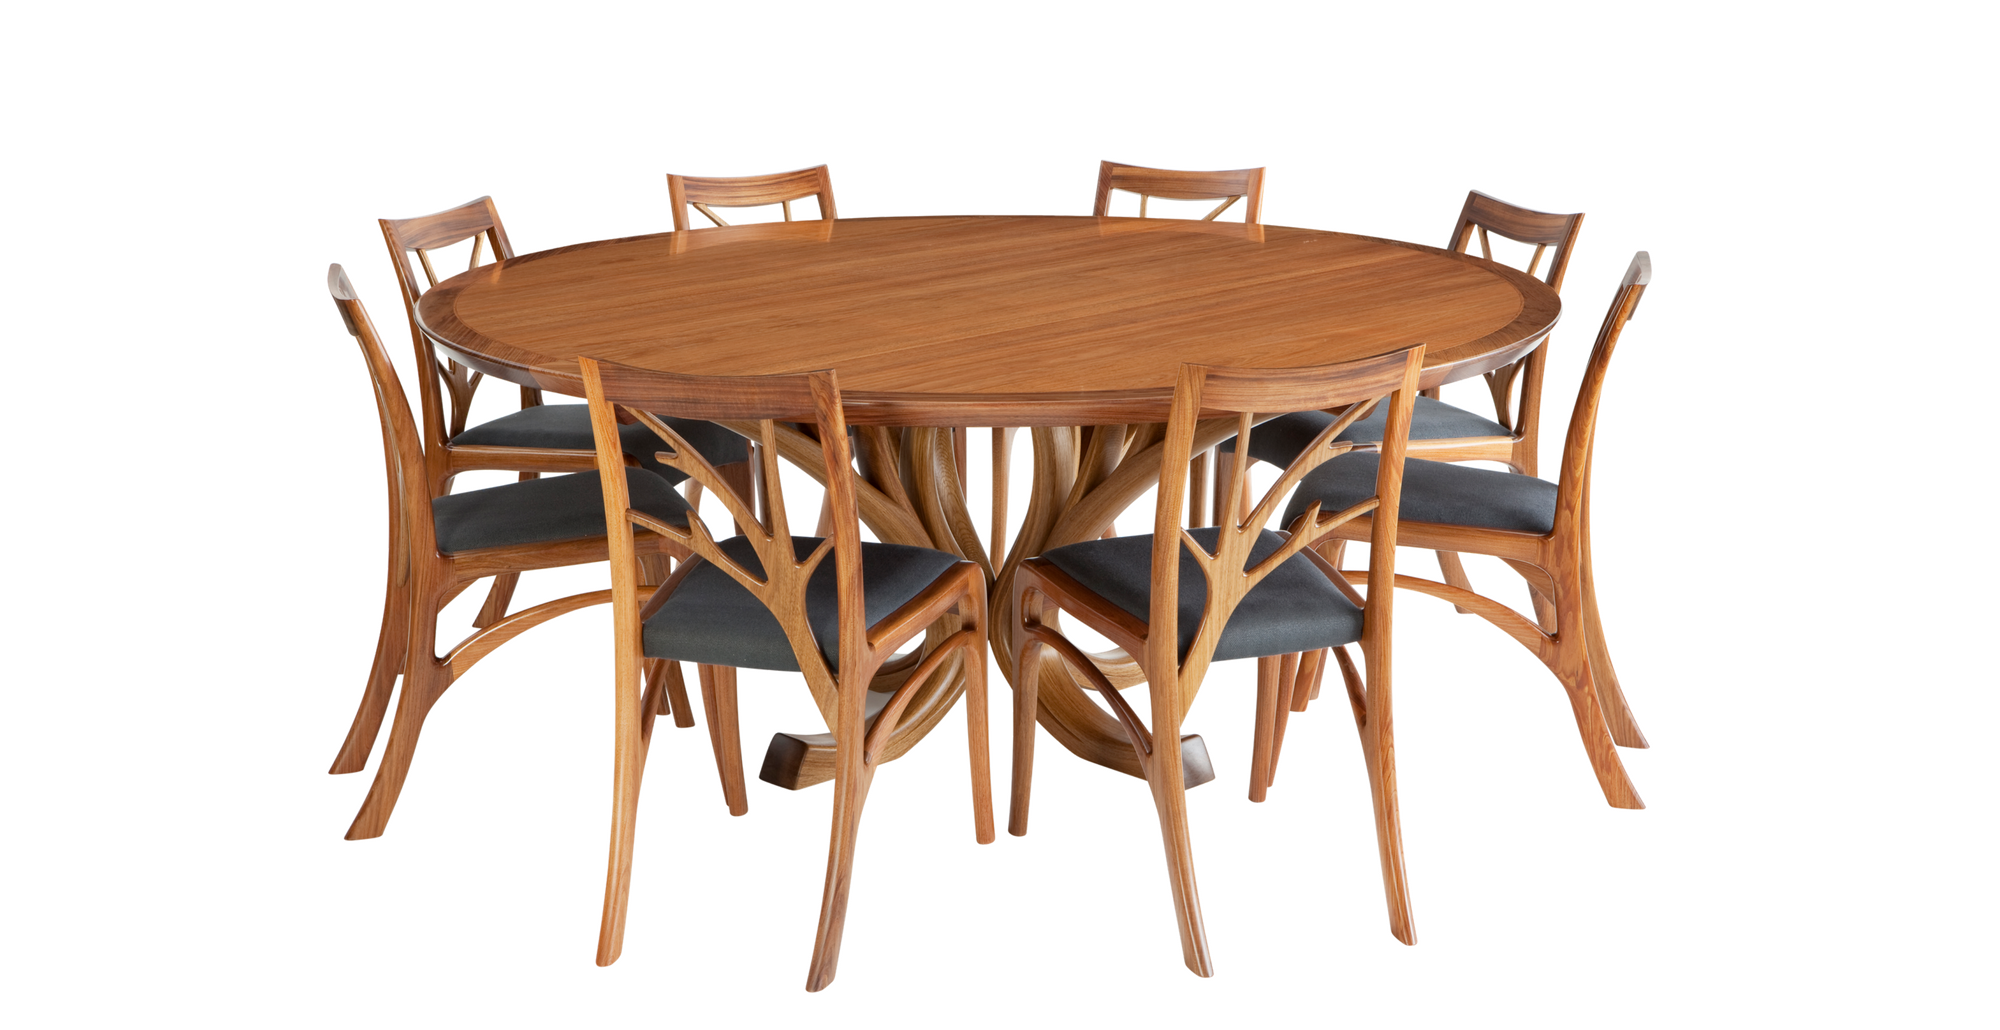 Custom made solid timber round dining suite by Will Marx of Marxraft